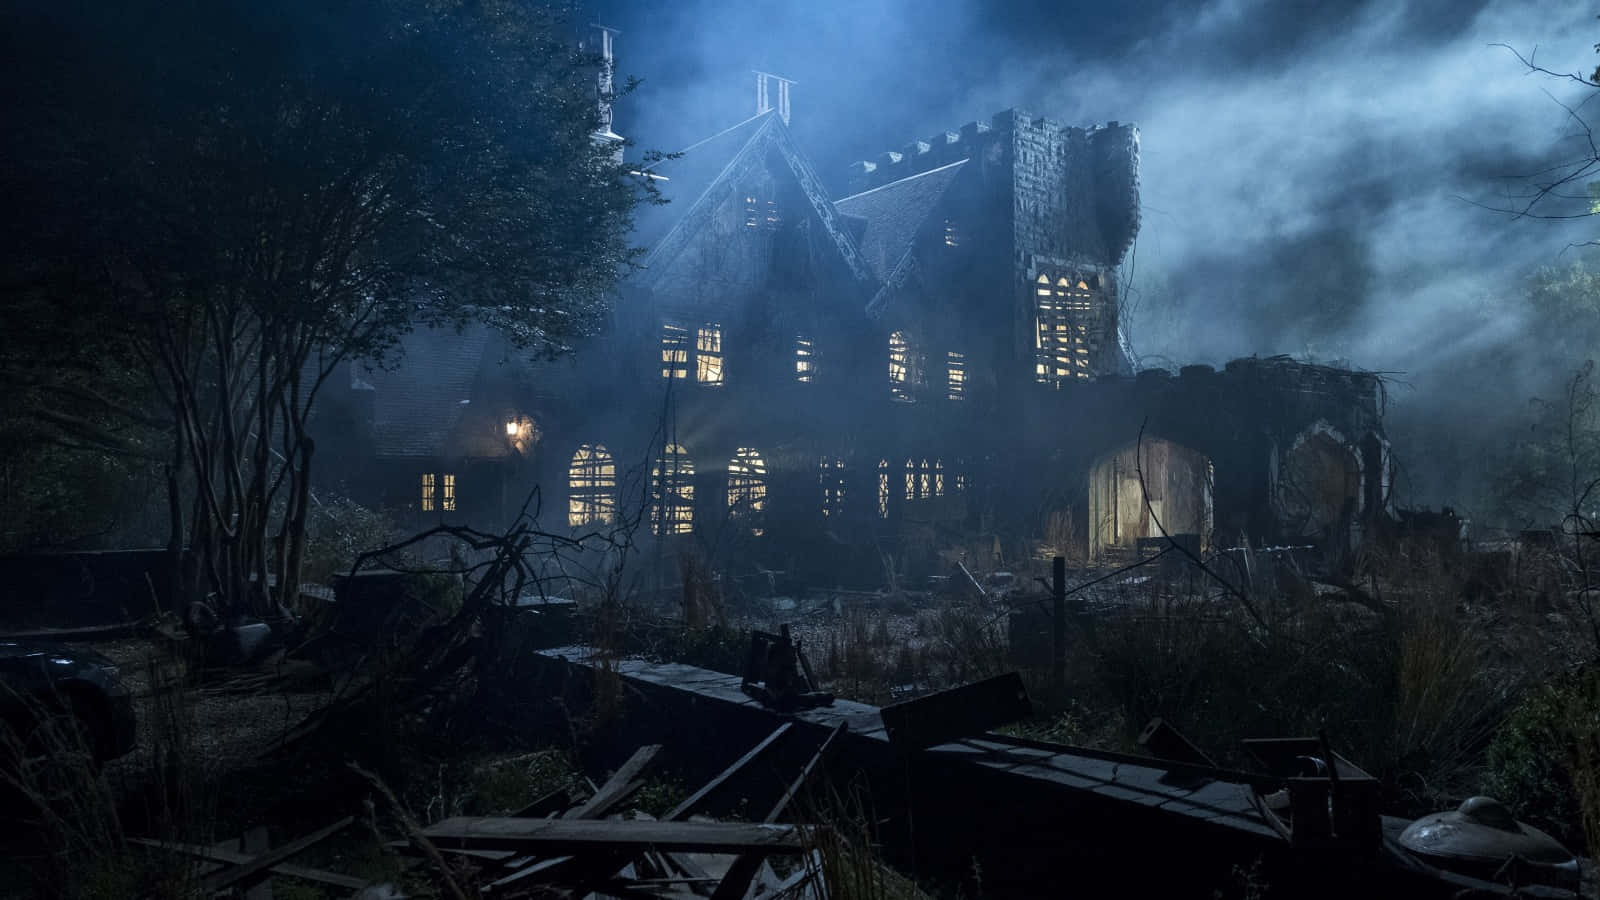 An Eerily Captivating Scene From Netflix's - The Haunting Of Bly Manor Background